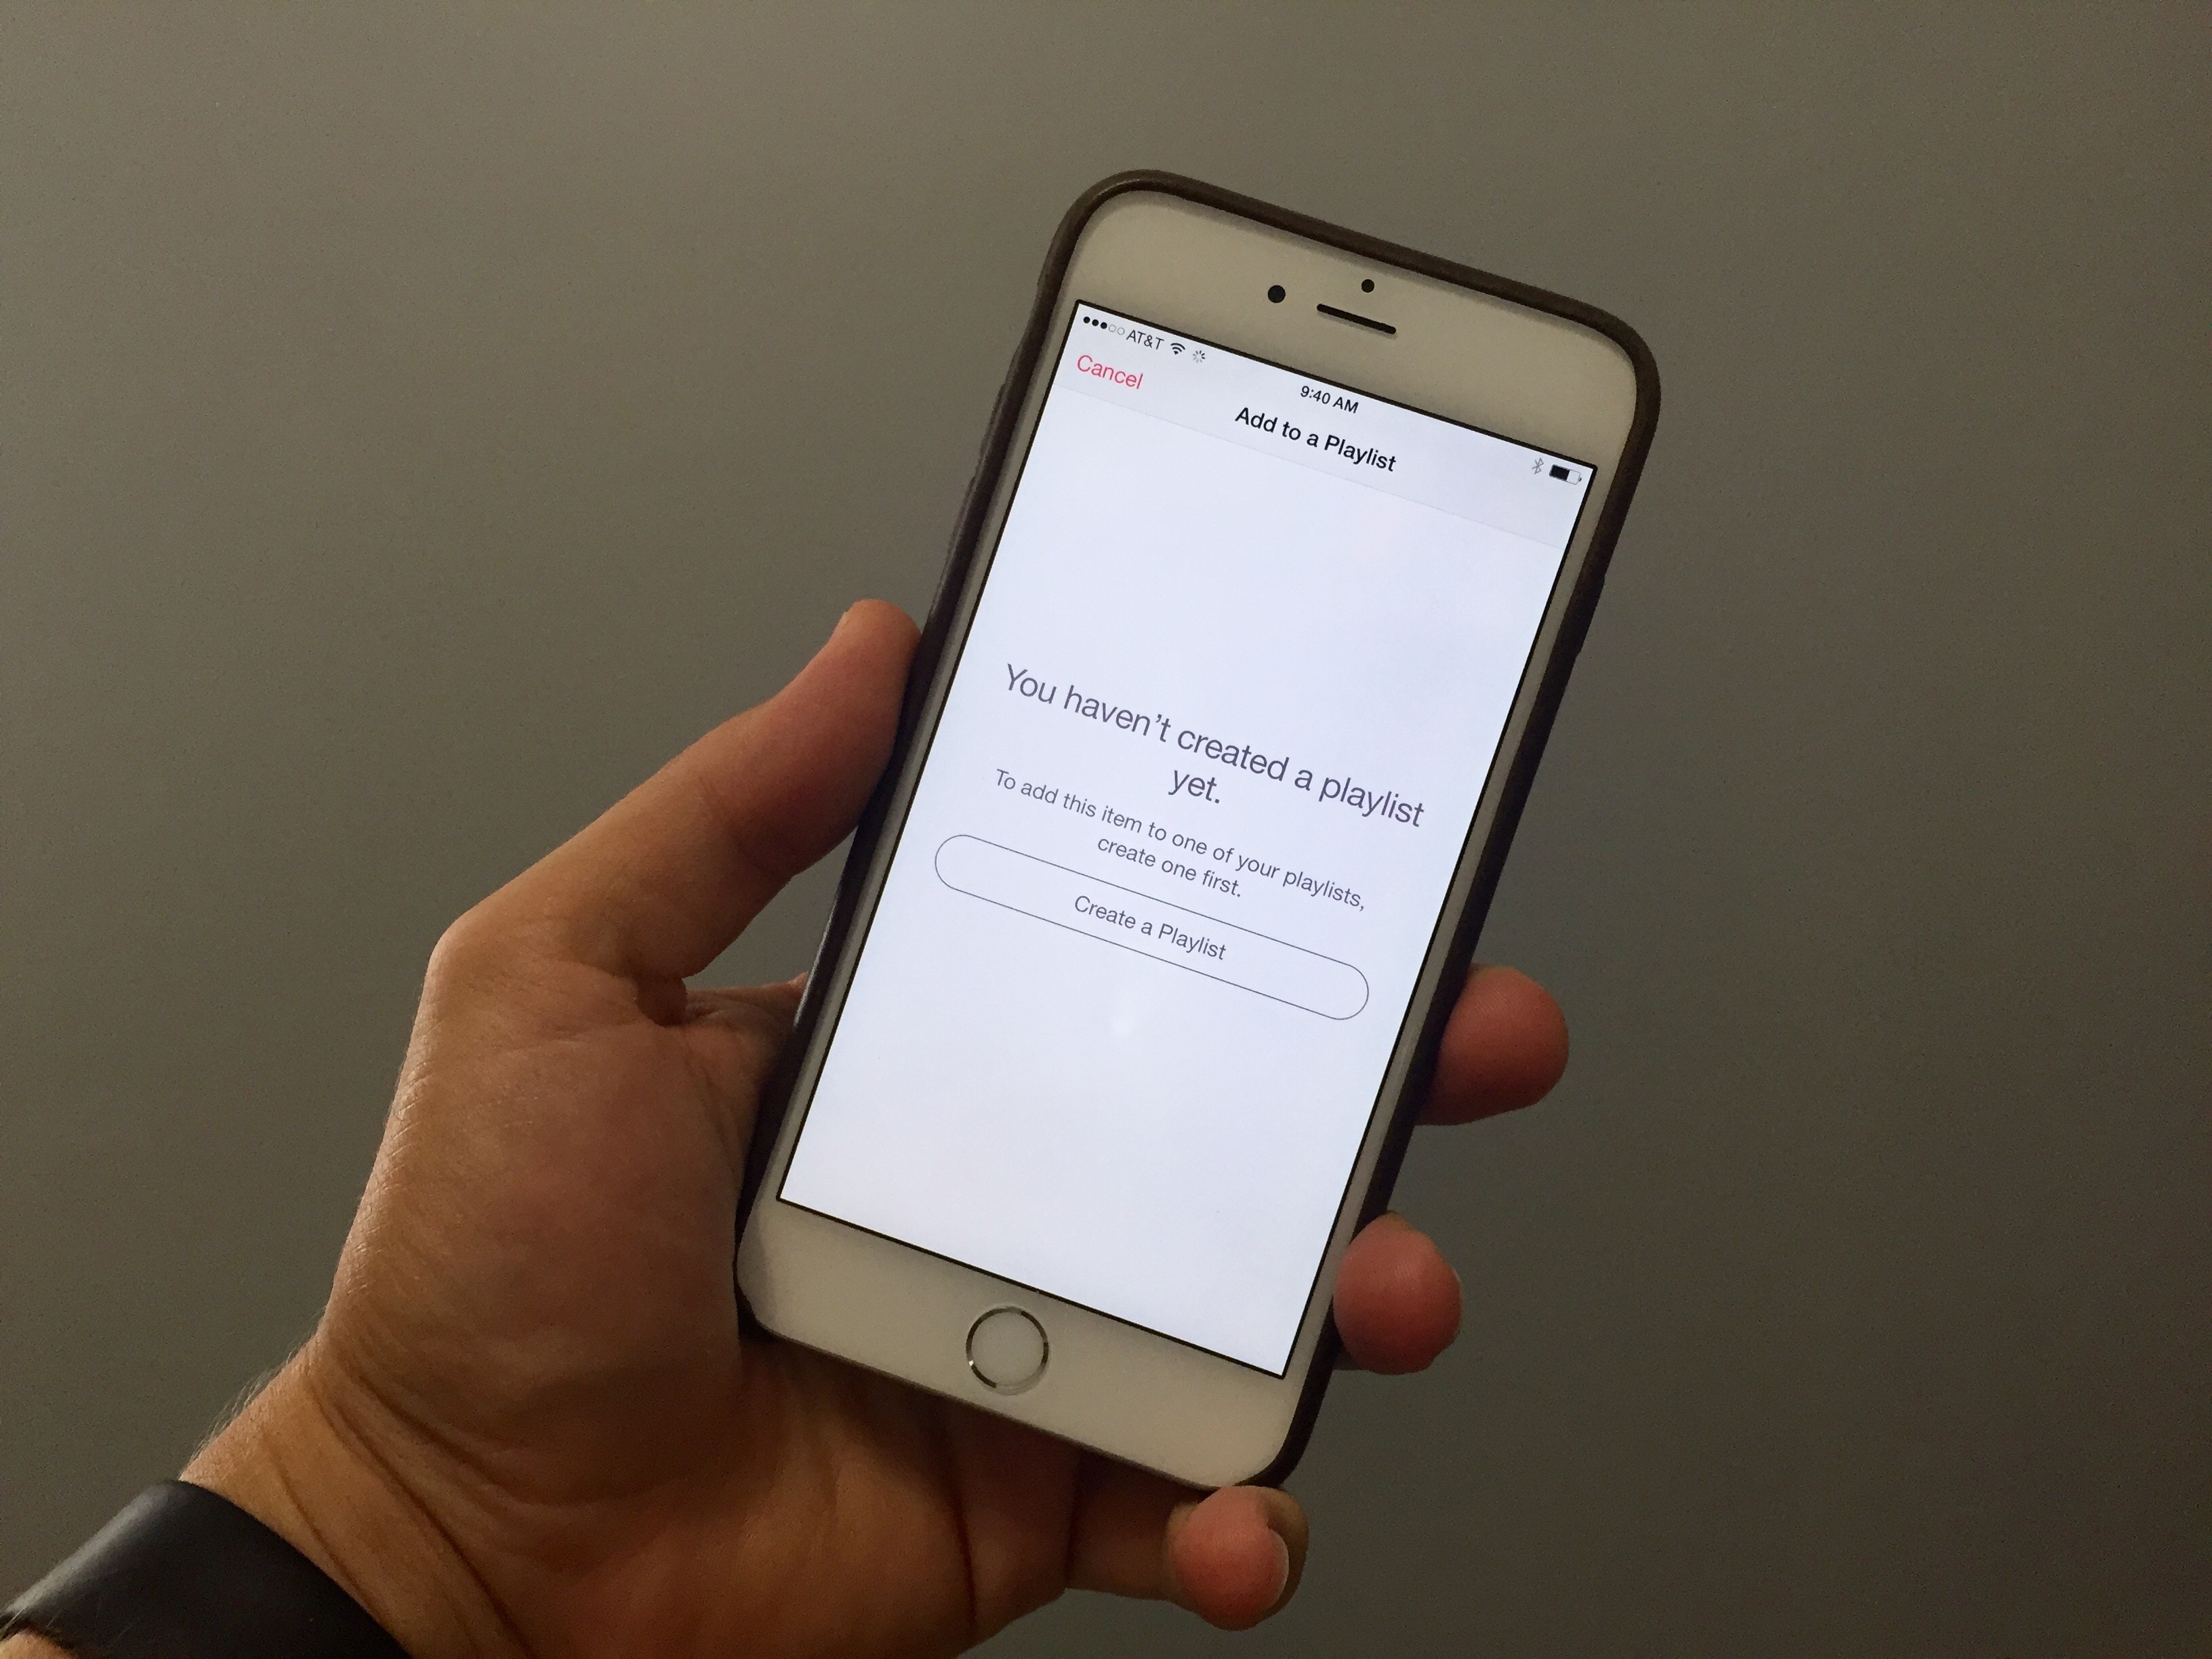 iOS 8.4.1 brings small, but useful Apple Music fixes.